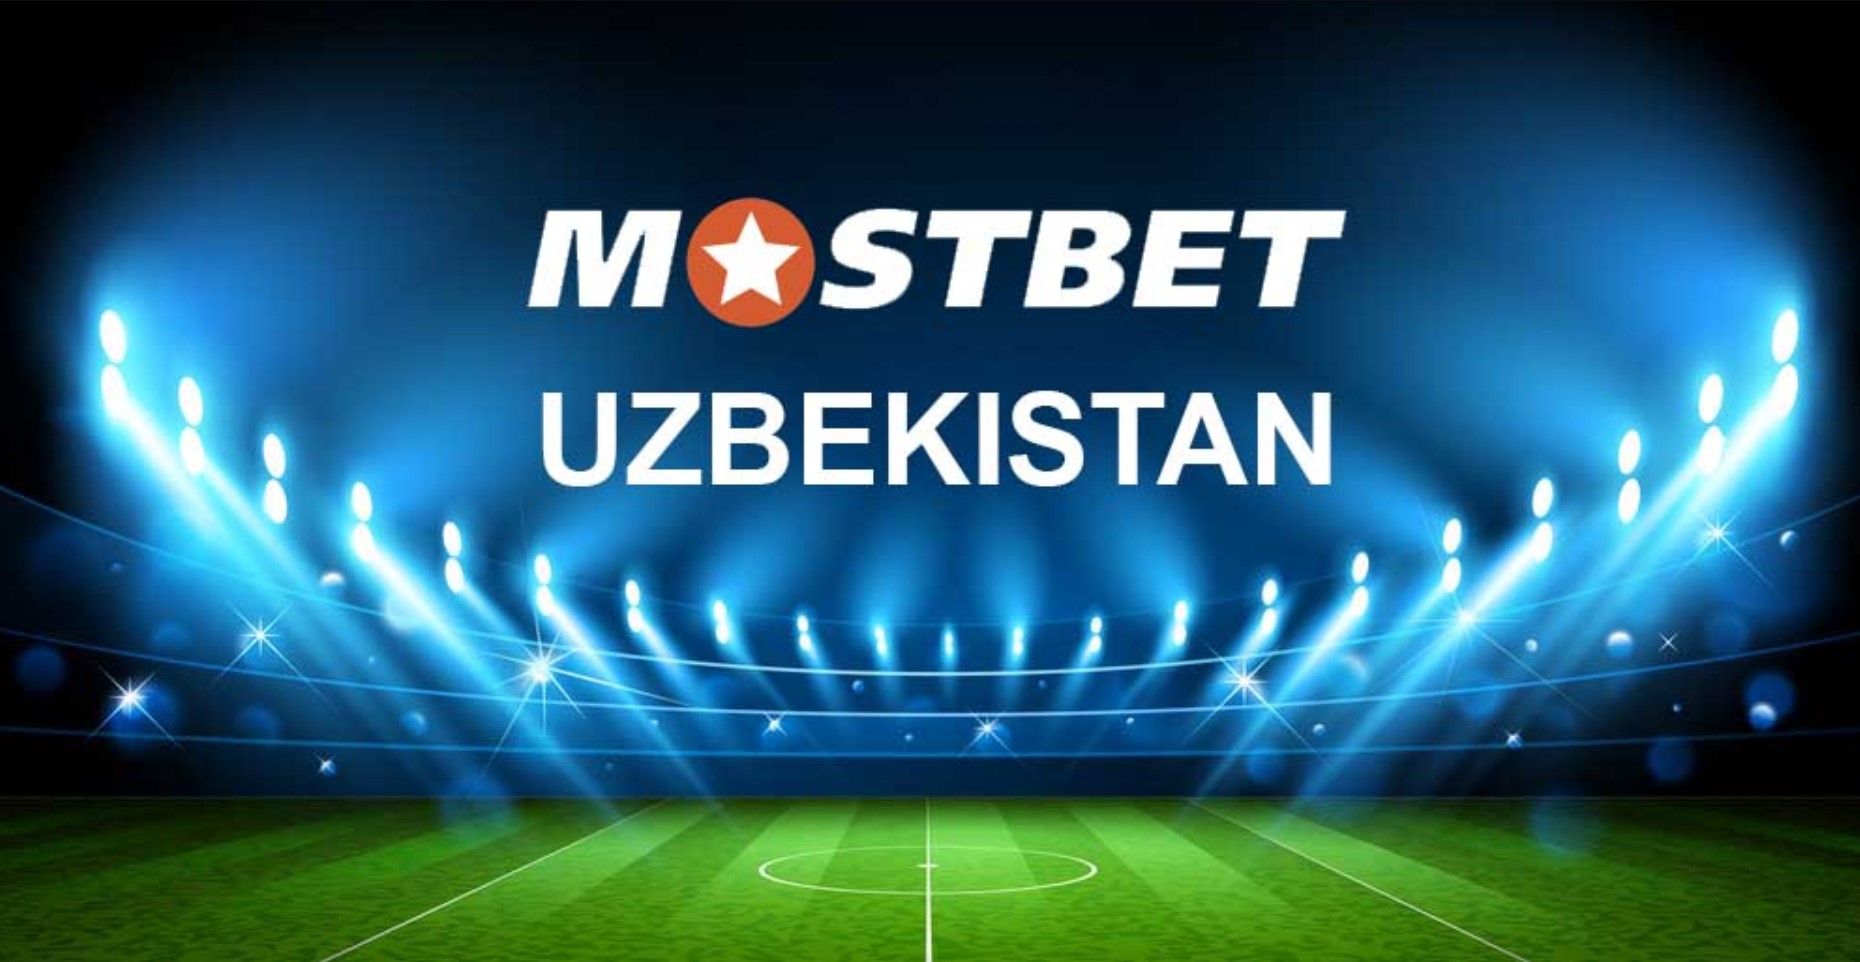 Find Out How I Cured My Mostbet AZ 90 Bookmaker and Casino in Azerbaijan In 2 Days